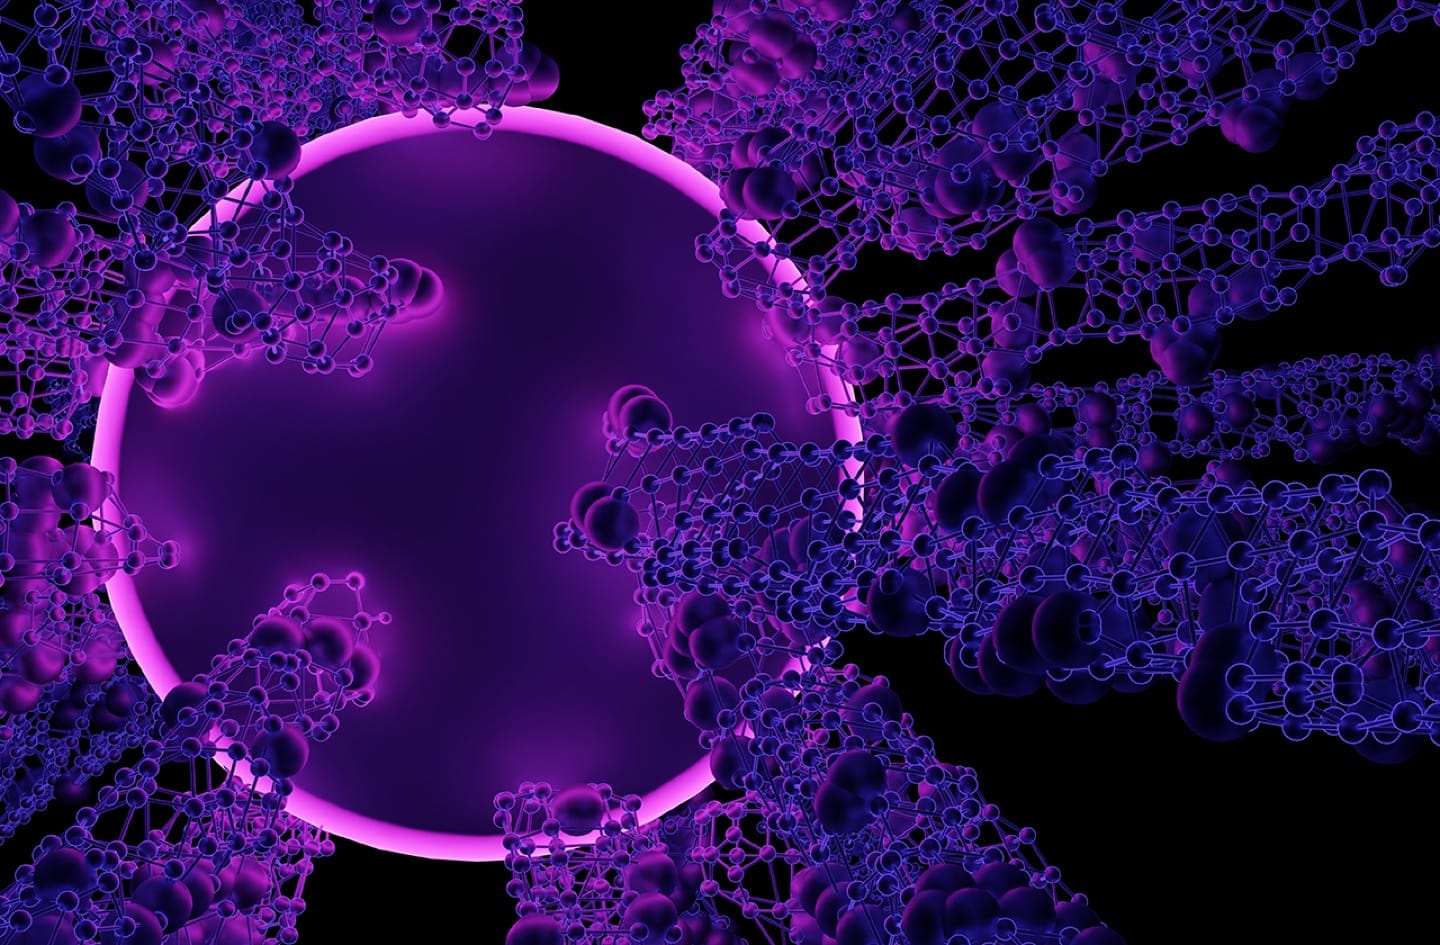 An image of a purple sphere on a black background.